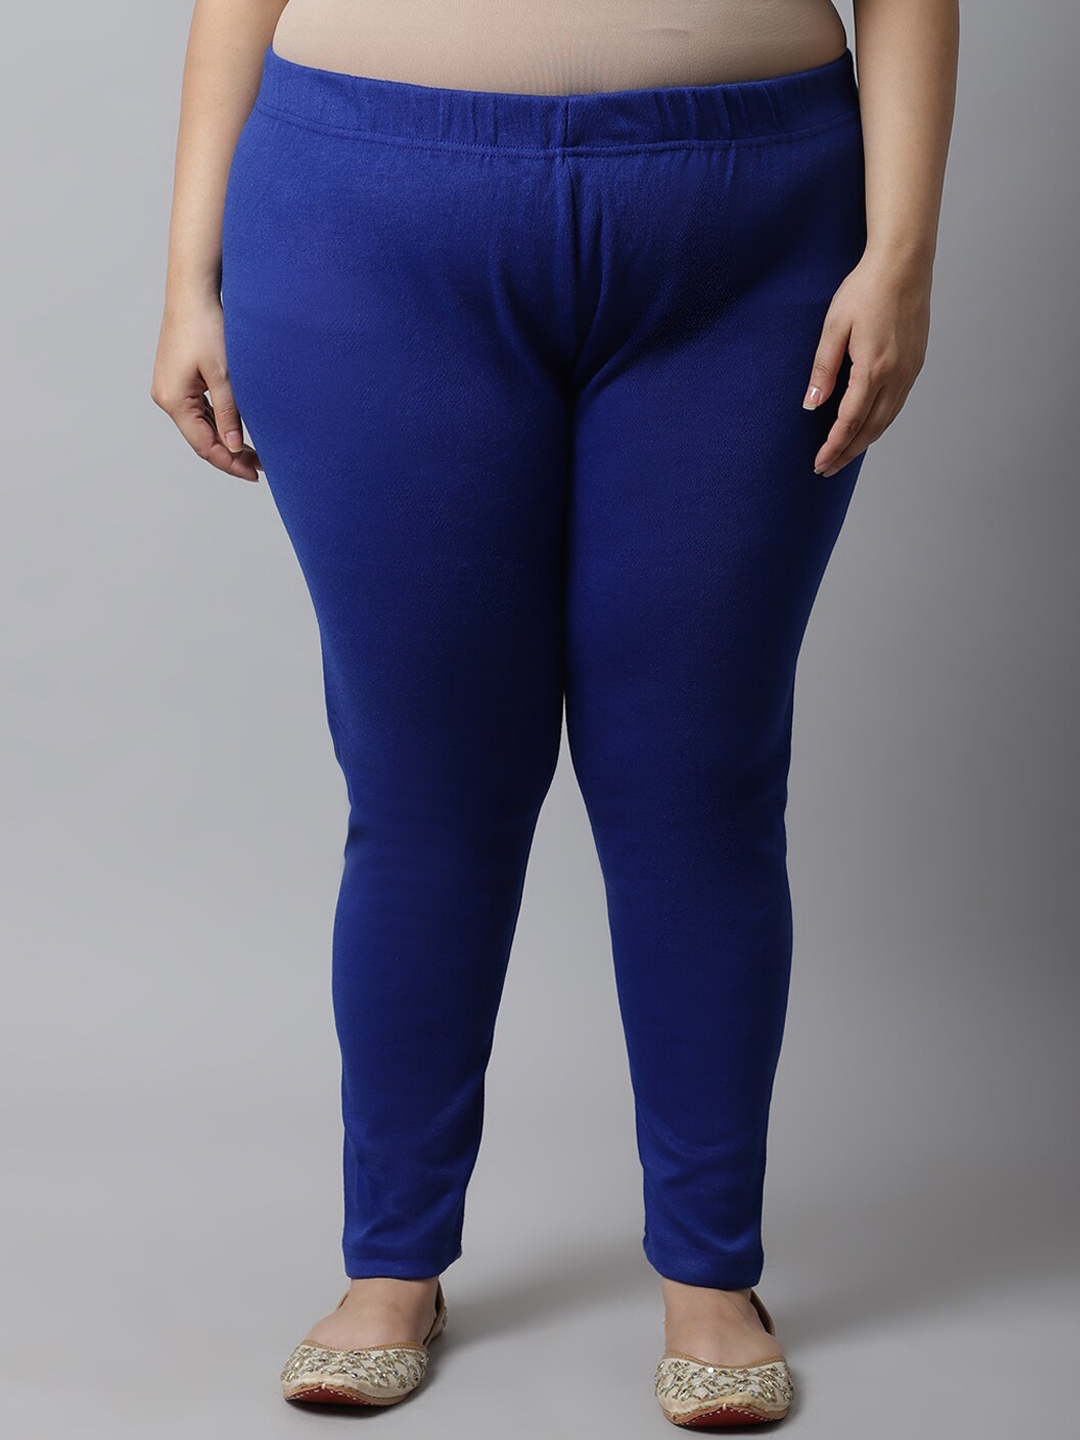 Buy TAG 7 Women Plus Size Blue Solid Ankle Length Leggings